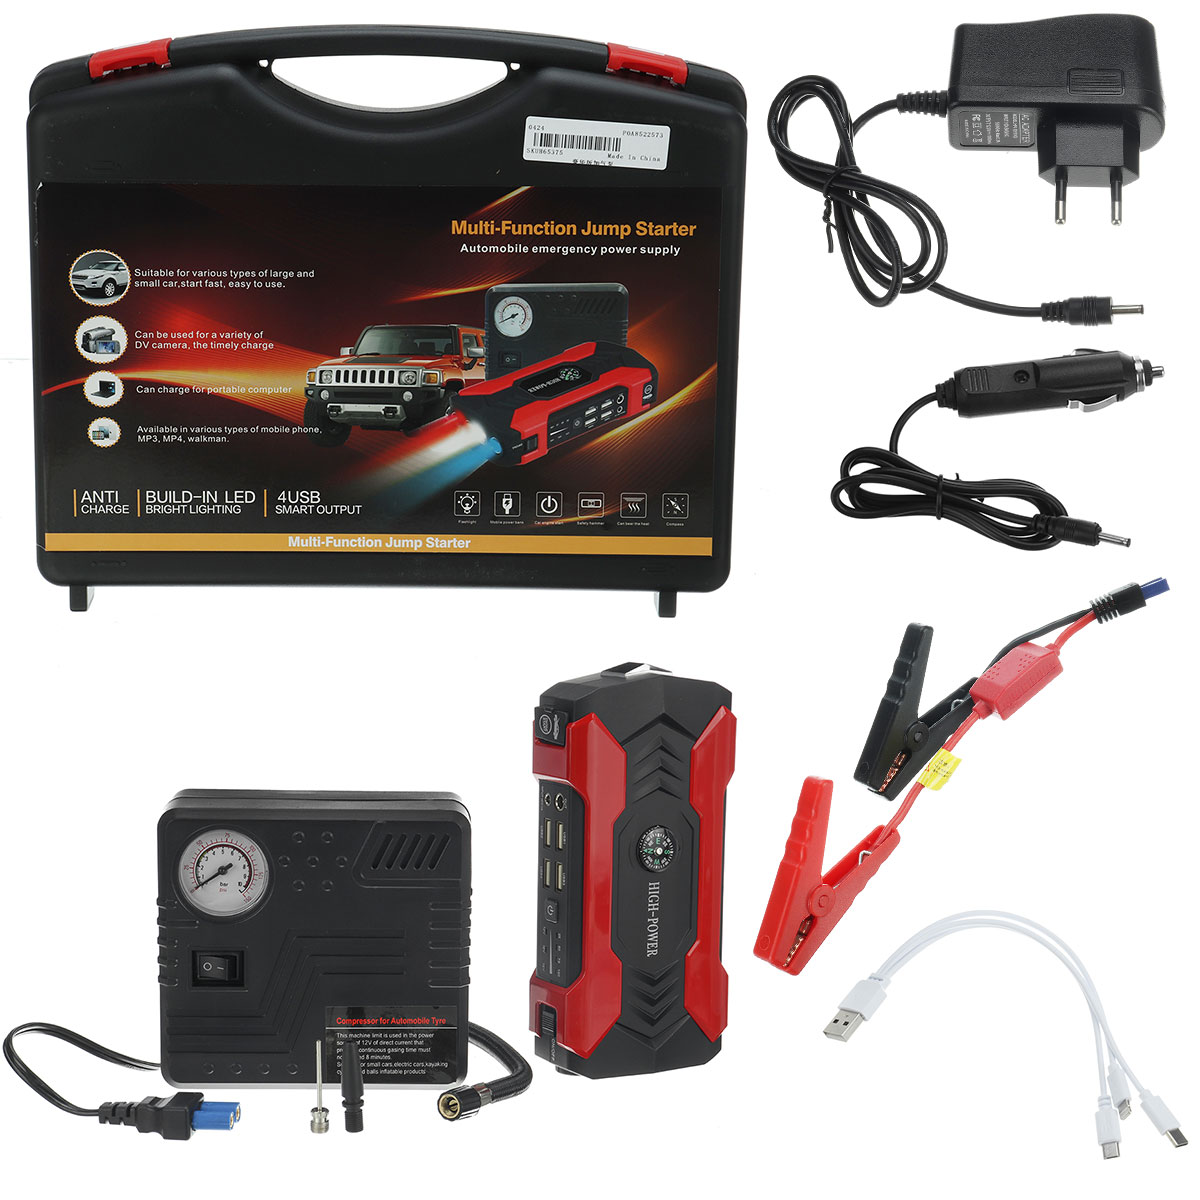 12V-Car-Jump-Starter-Battery-Booster-4USB-LED-Emergency-Auto-Quick-Charge-Power-Bank-1843625-3